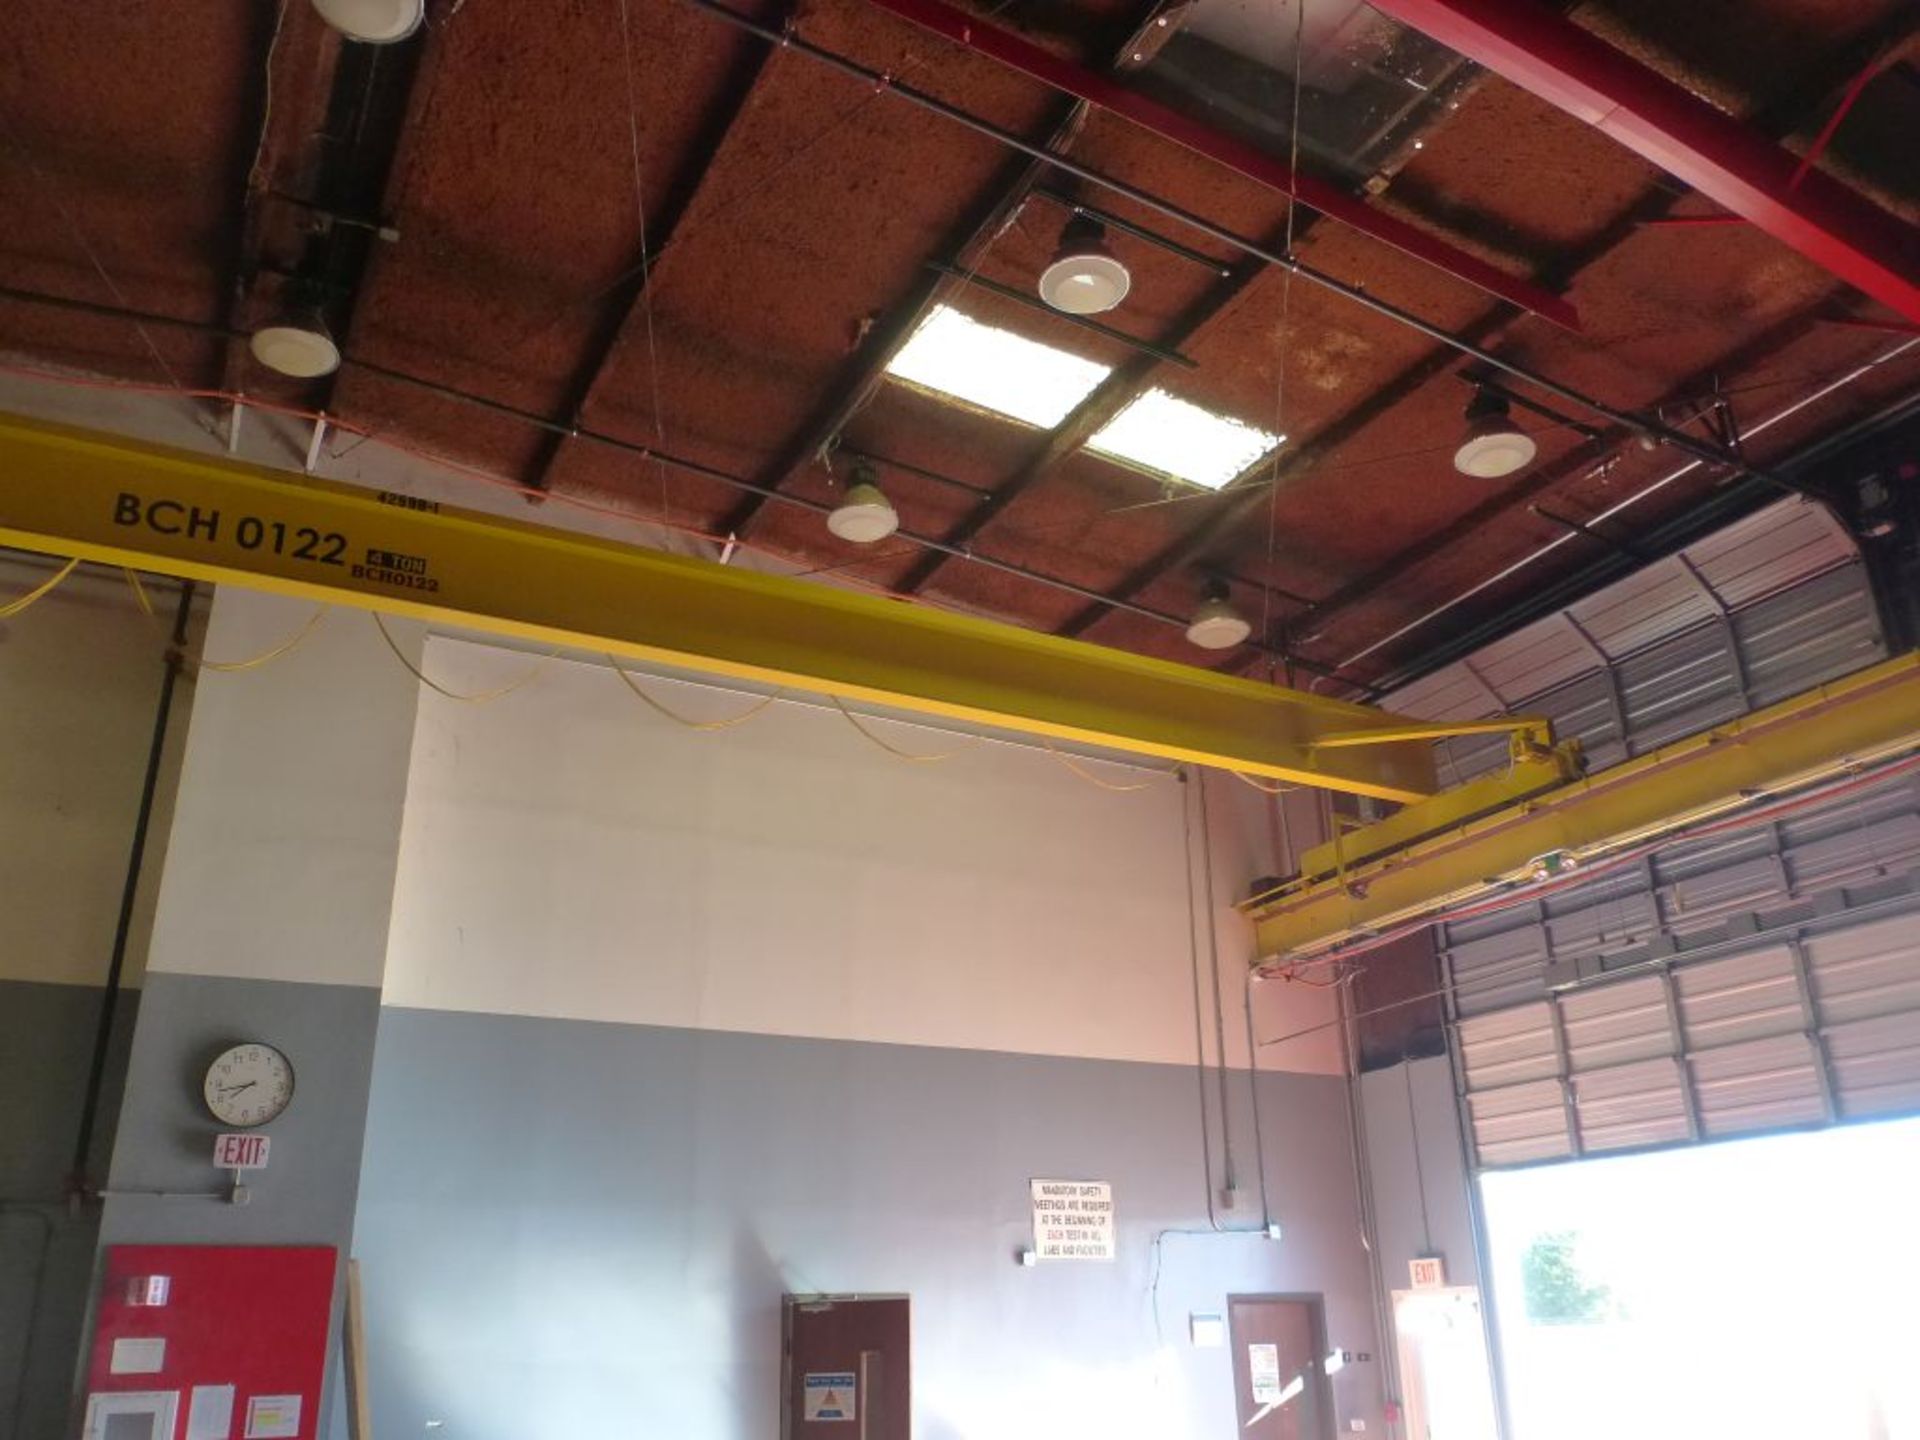 Abacus Equipment Inc 4 Ton Crane w/Wireless Controller | Serial No. BCH0122; Load Bar Span: 52'; - Image 3 of 7